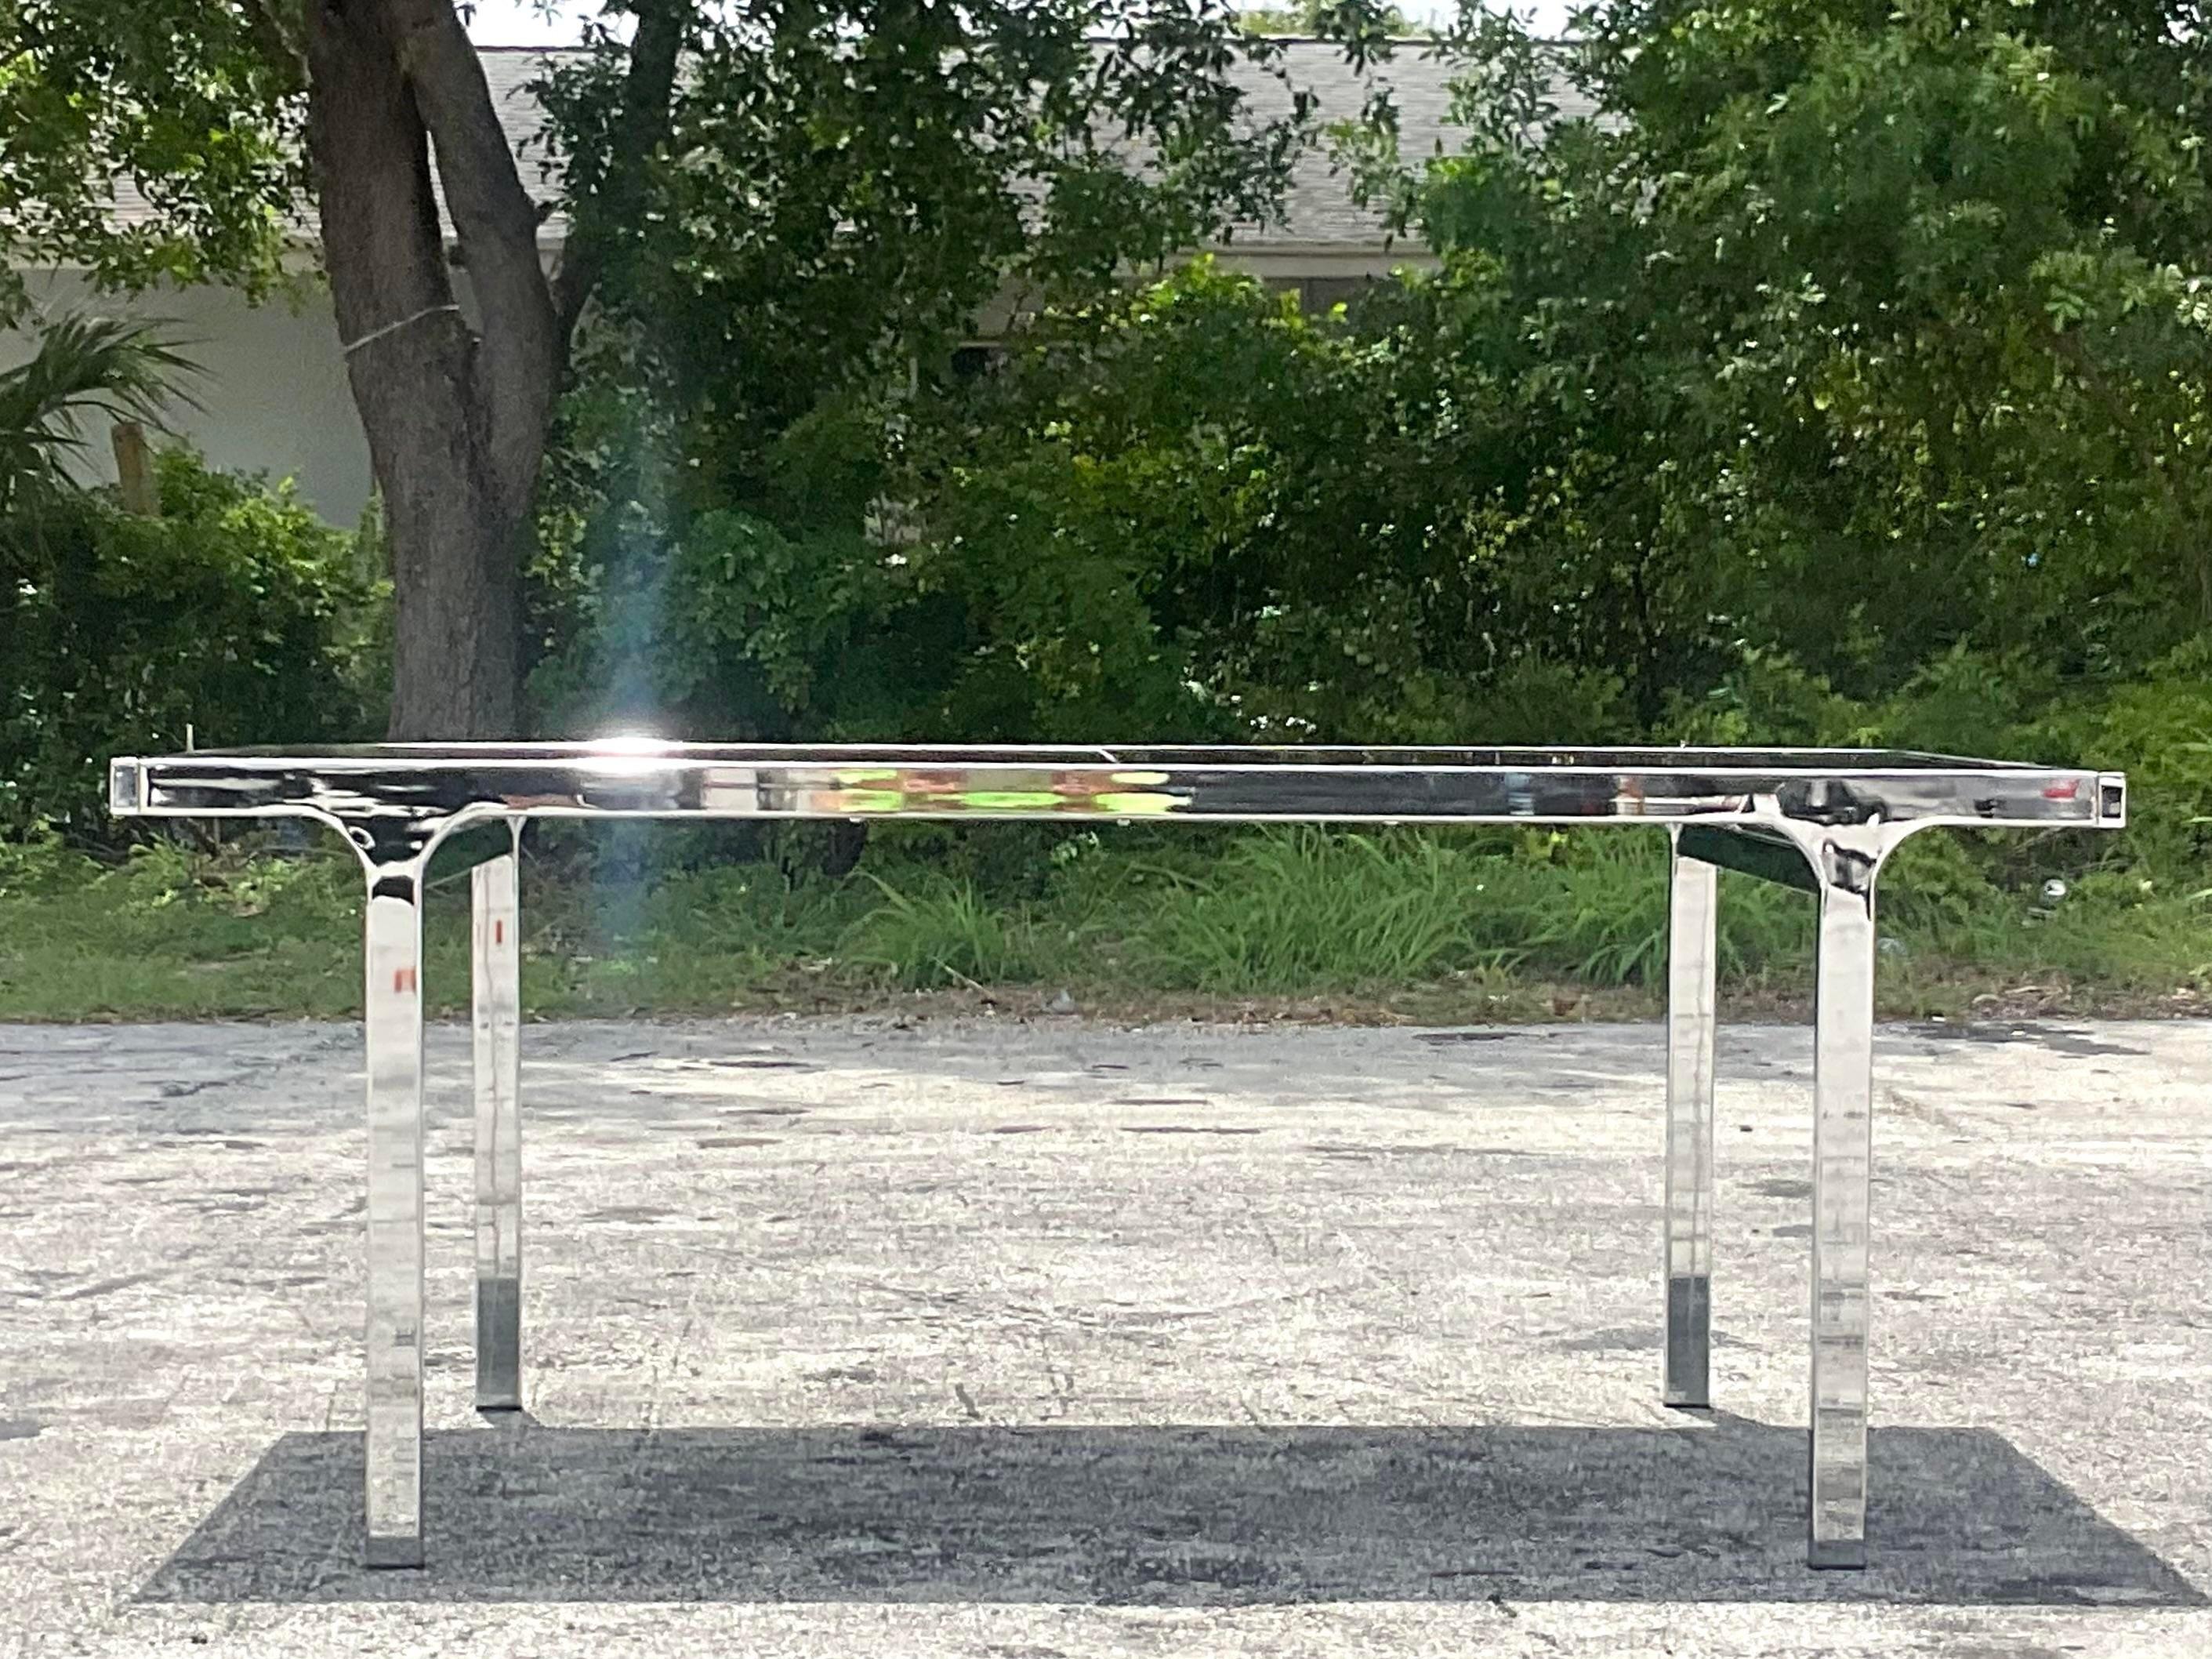 An exceptional vintage Boho dining table. Made by the Pierre Cardin group in the 80s and signed along the frame. Inset smoked glass top. Easily extends to 93.5. Acquired from a Palm Beach estate.